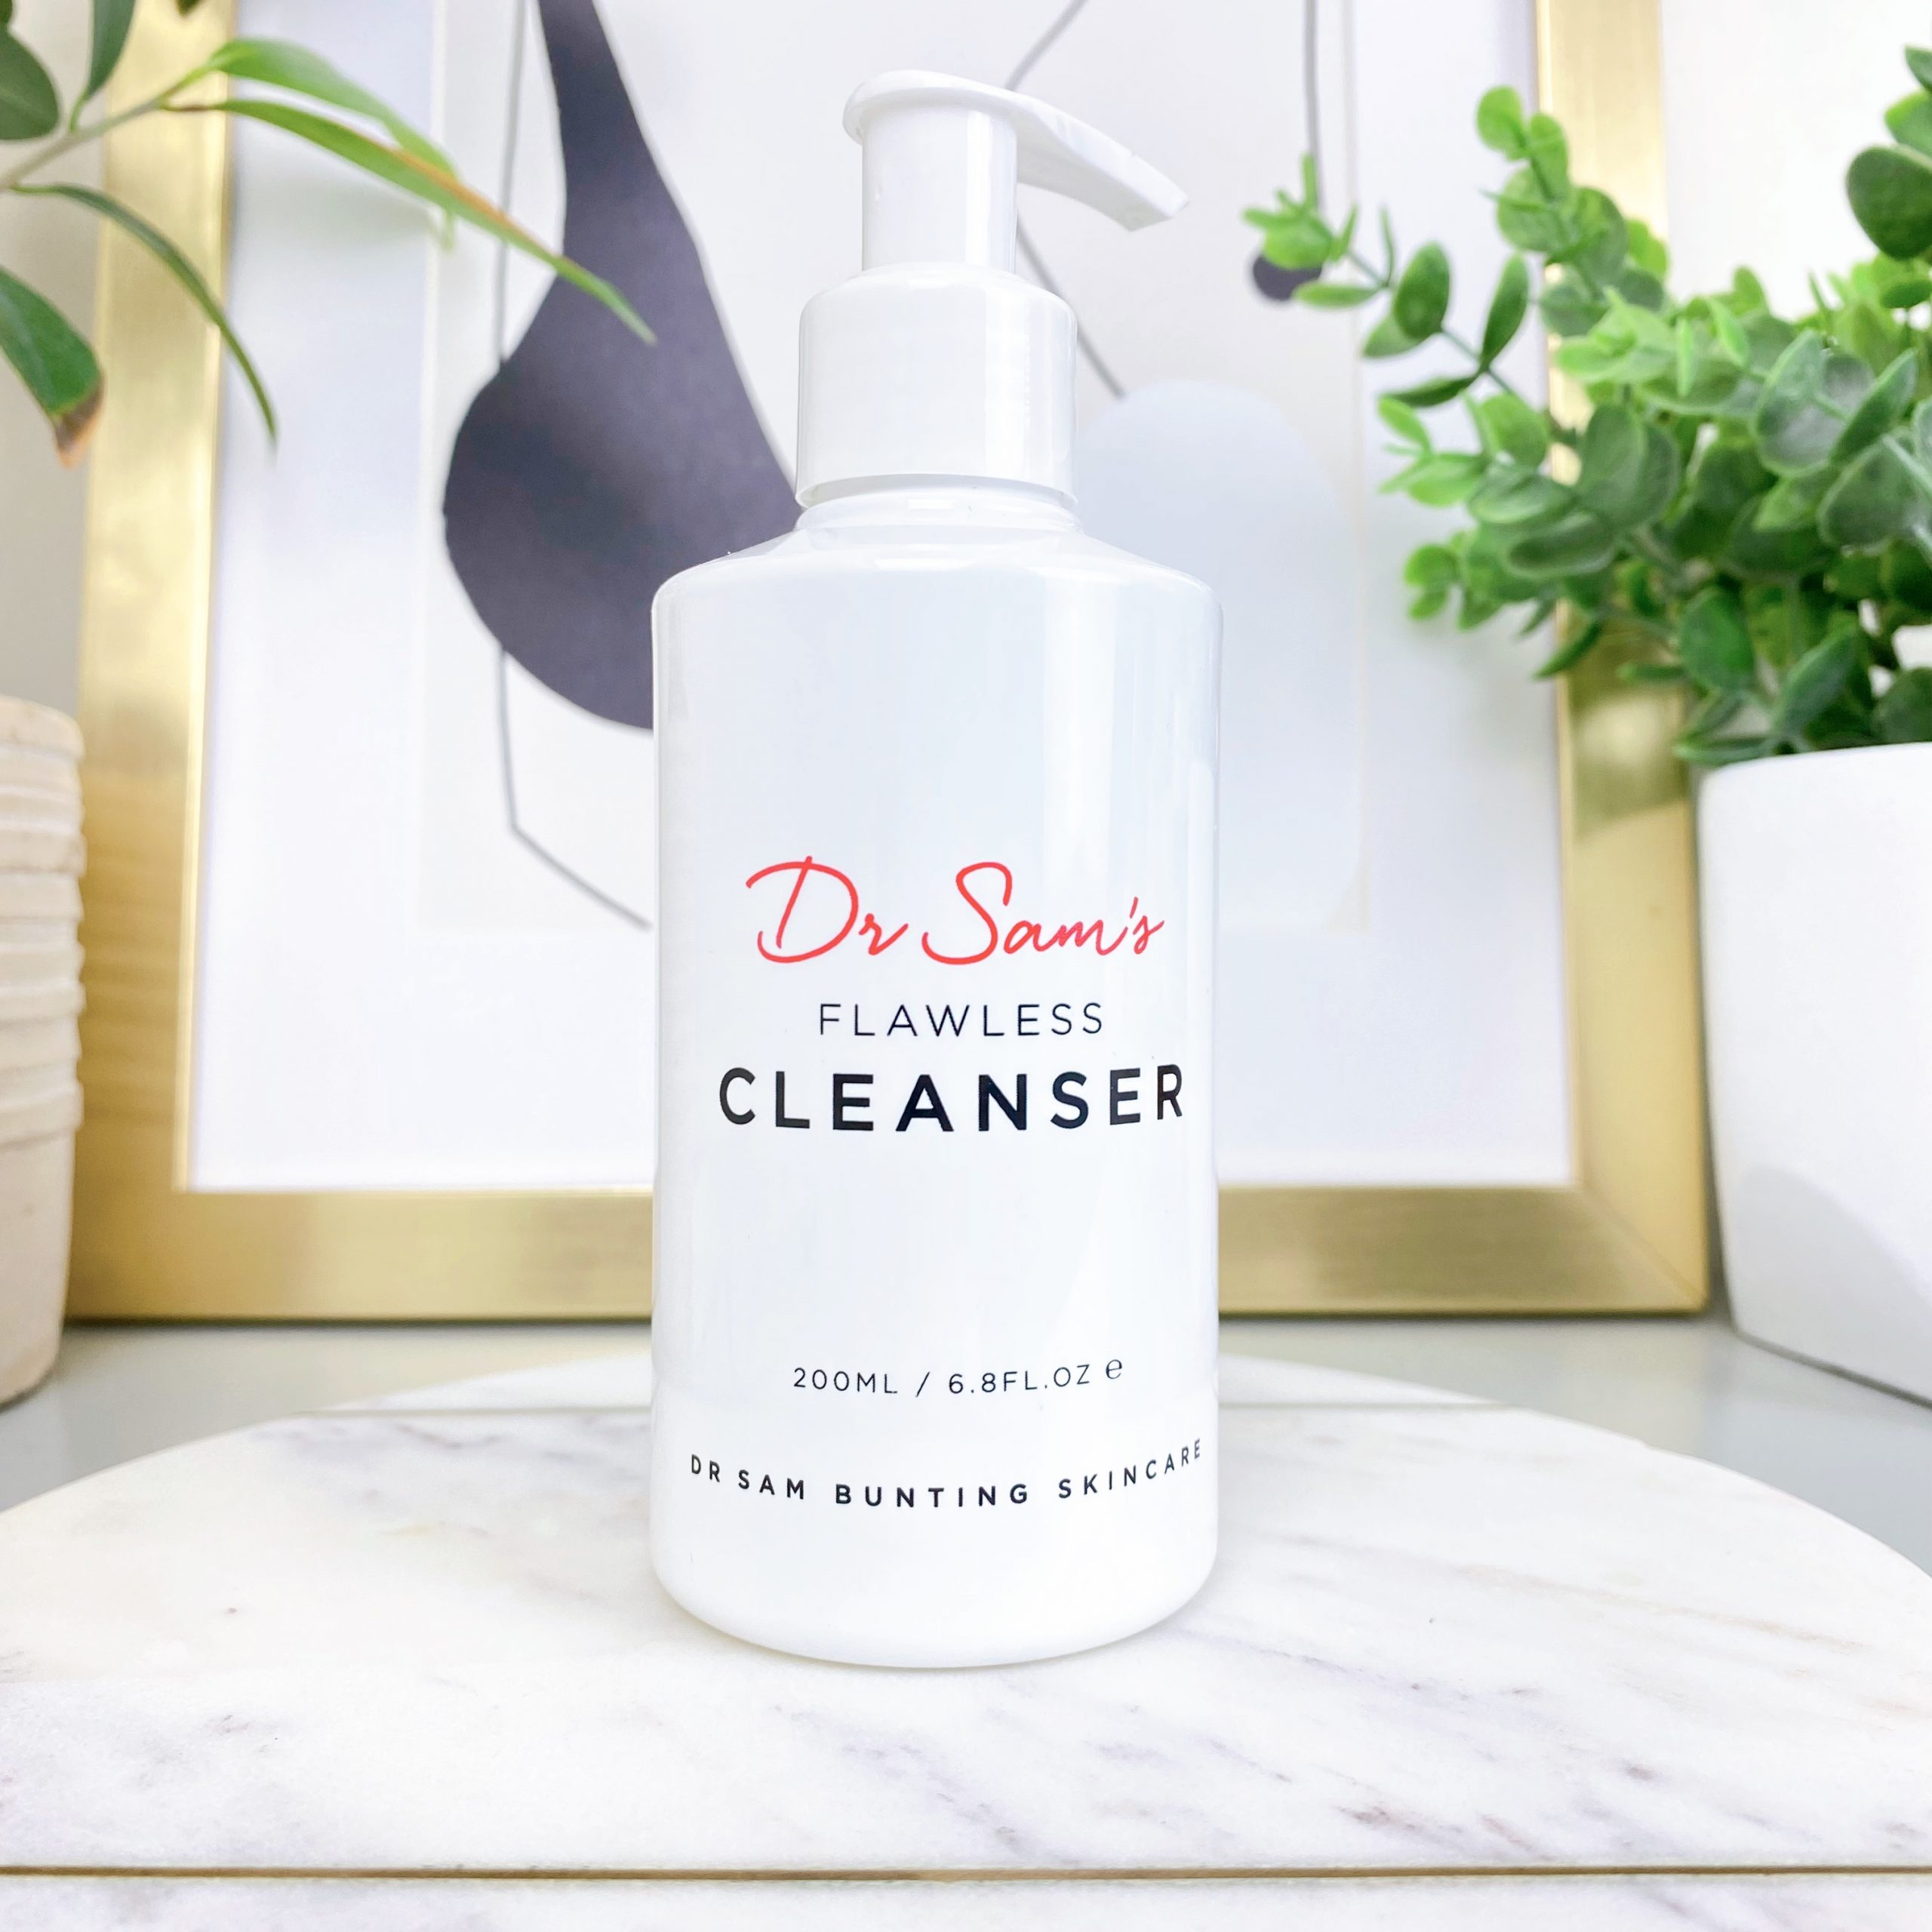 Dr Sam Bunting Flawless Cleanser